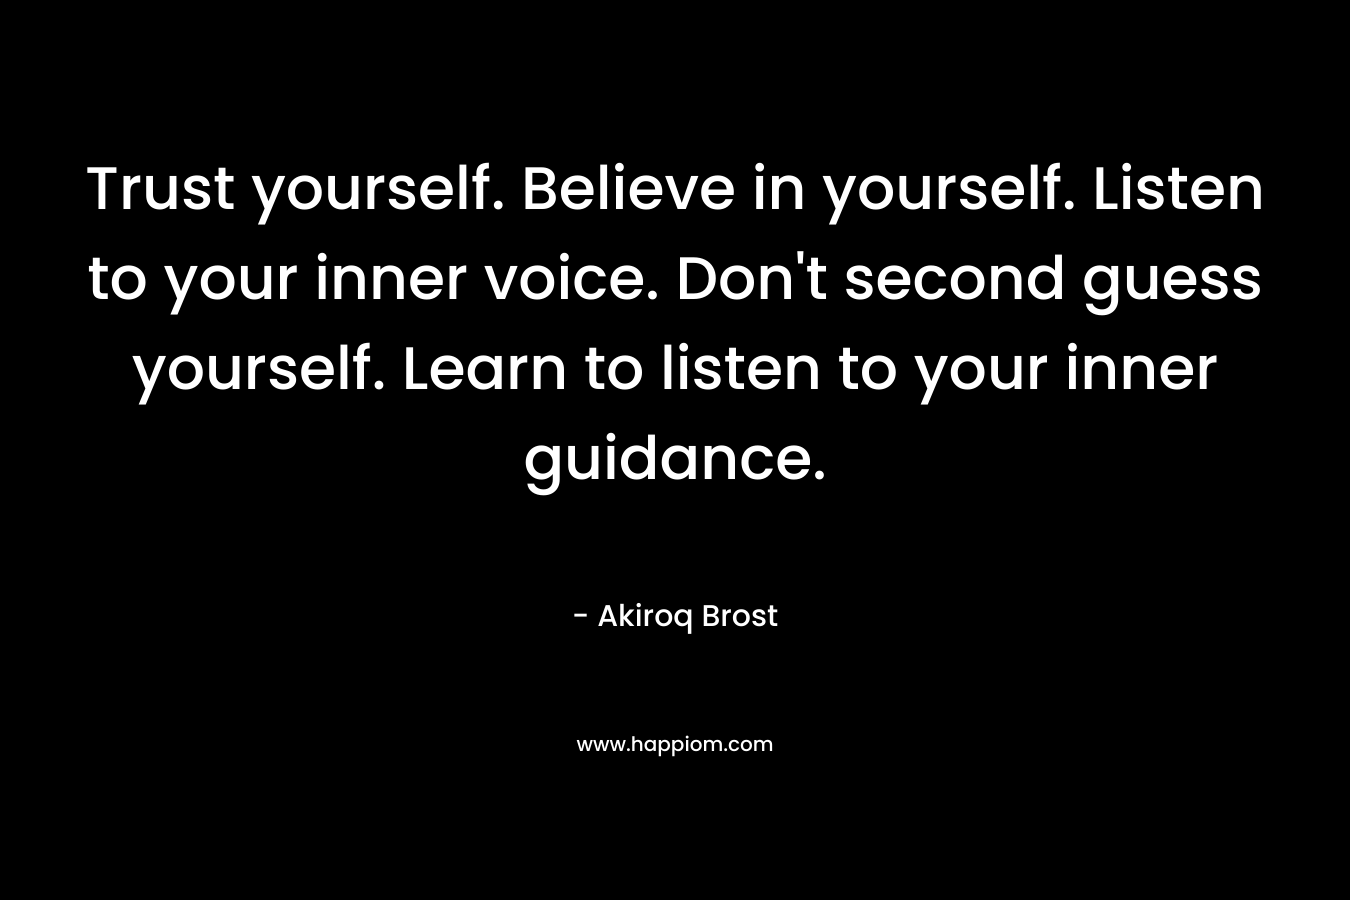 Trust yourself. Believe in yourself. Listen to your inner voice. Don't second guess yourself. Learn to listen to your inner guidance.